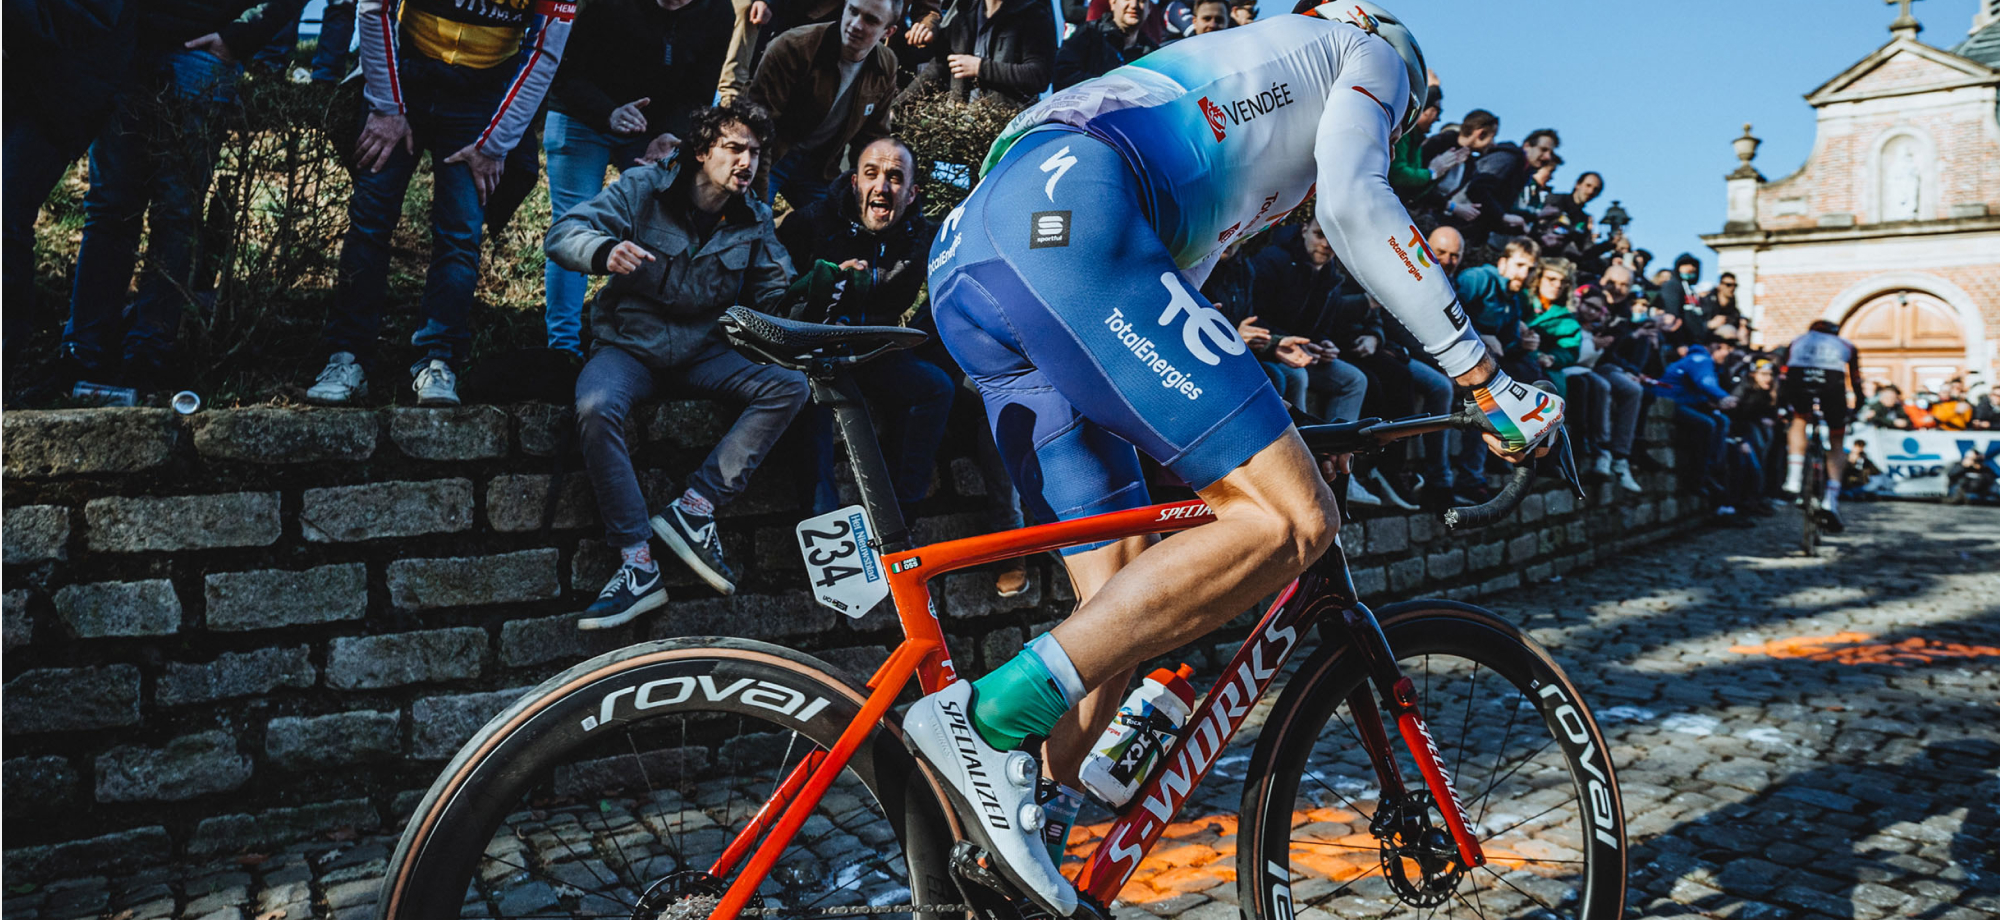 Professional cyclist racing up a cobbled climb in front of screaming fans on S-Works Turbo tires